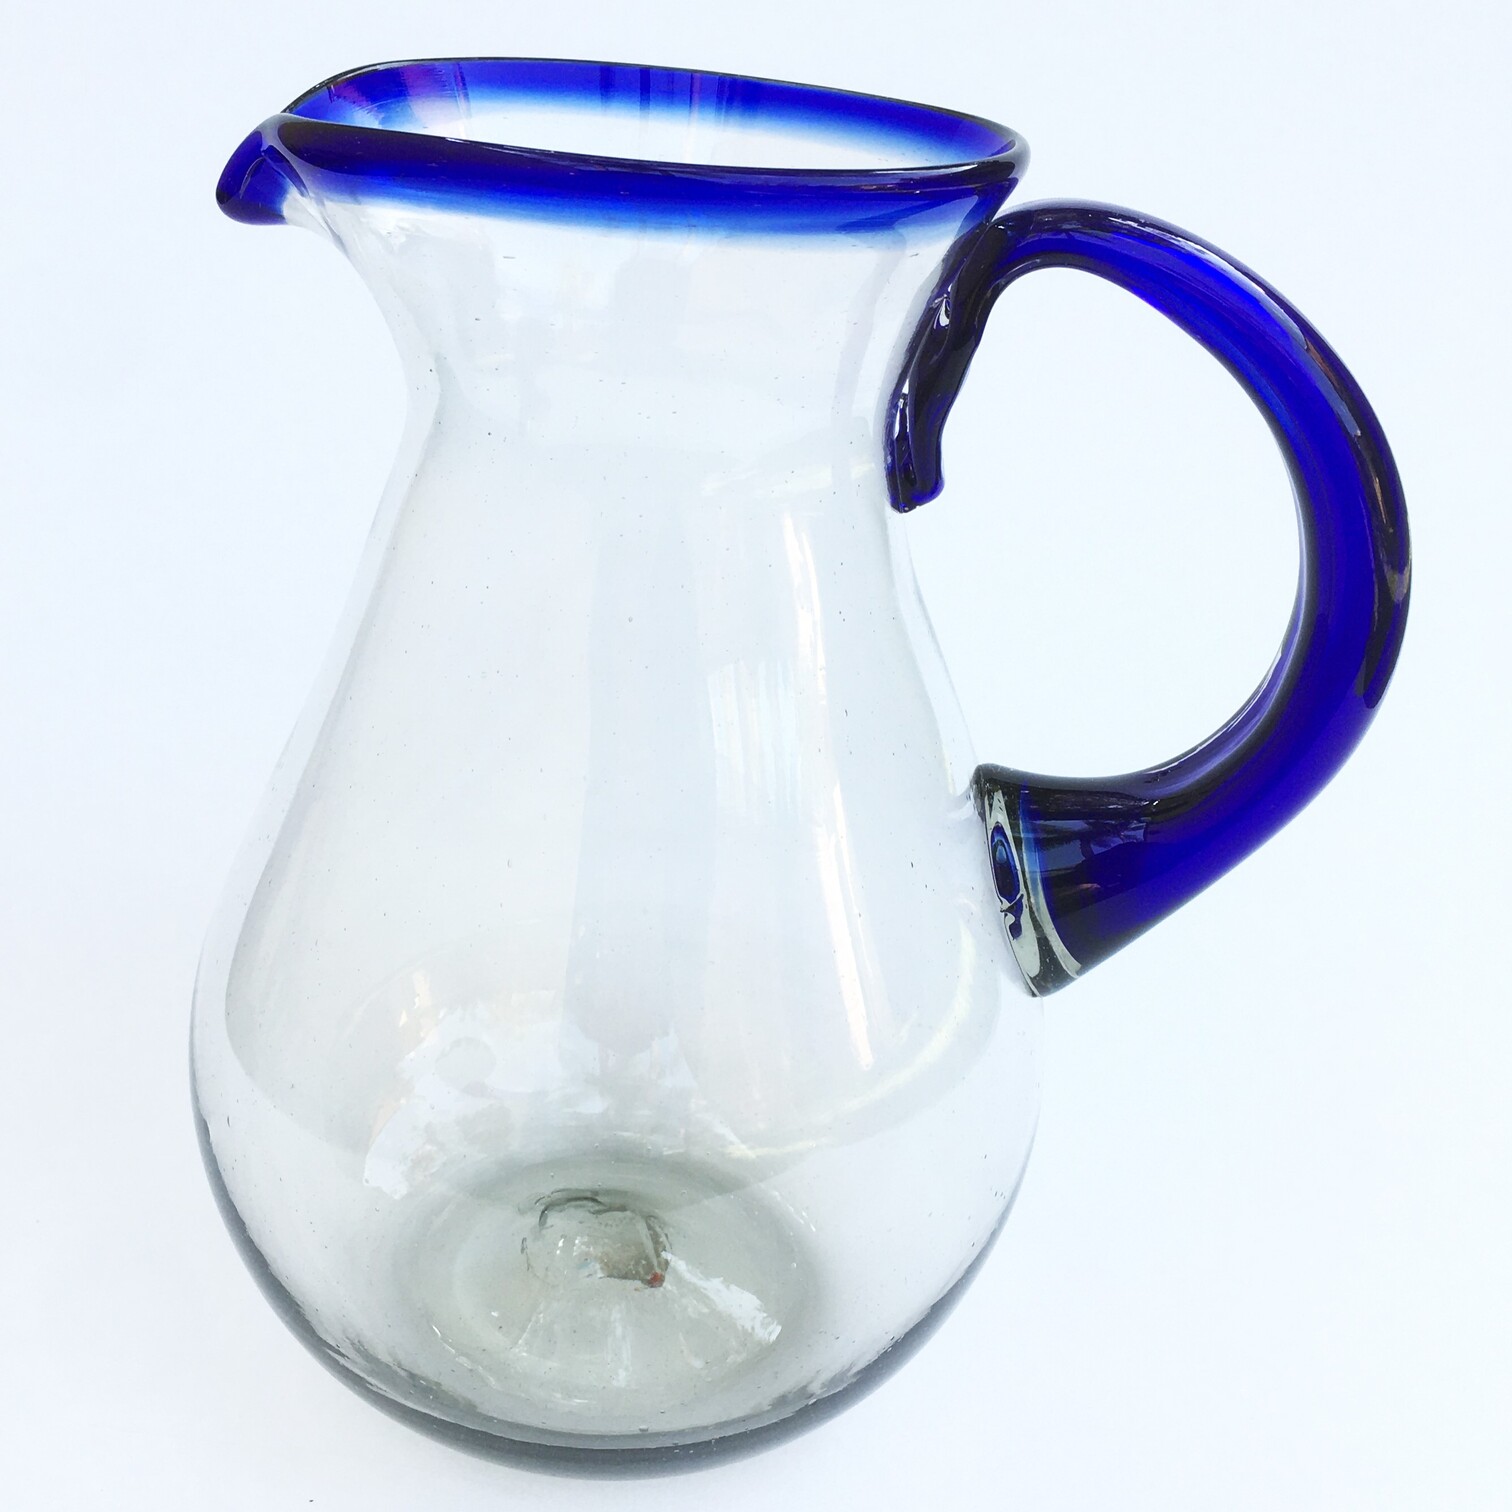 MEXICAN GLASSWARE / Cobalt Blue Rim 84 oz Tall Pear Pitcher / This classic pitcher is perfect for pouring out all kinds of refreshing drinks.